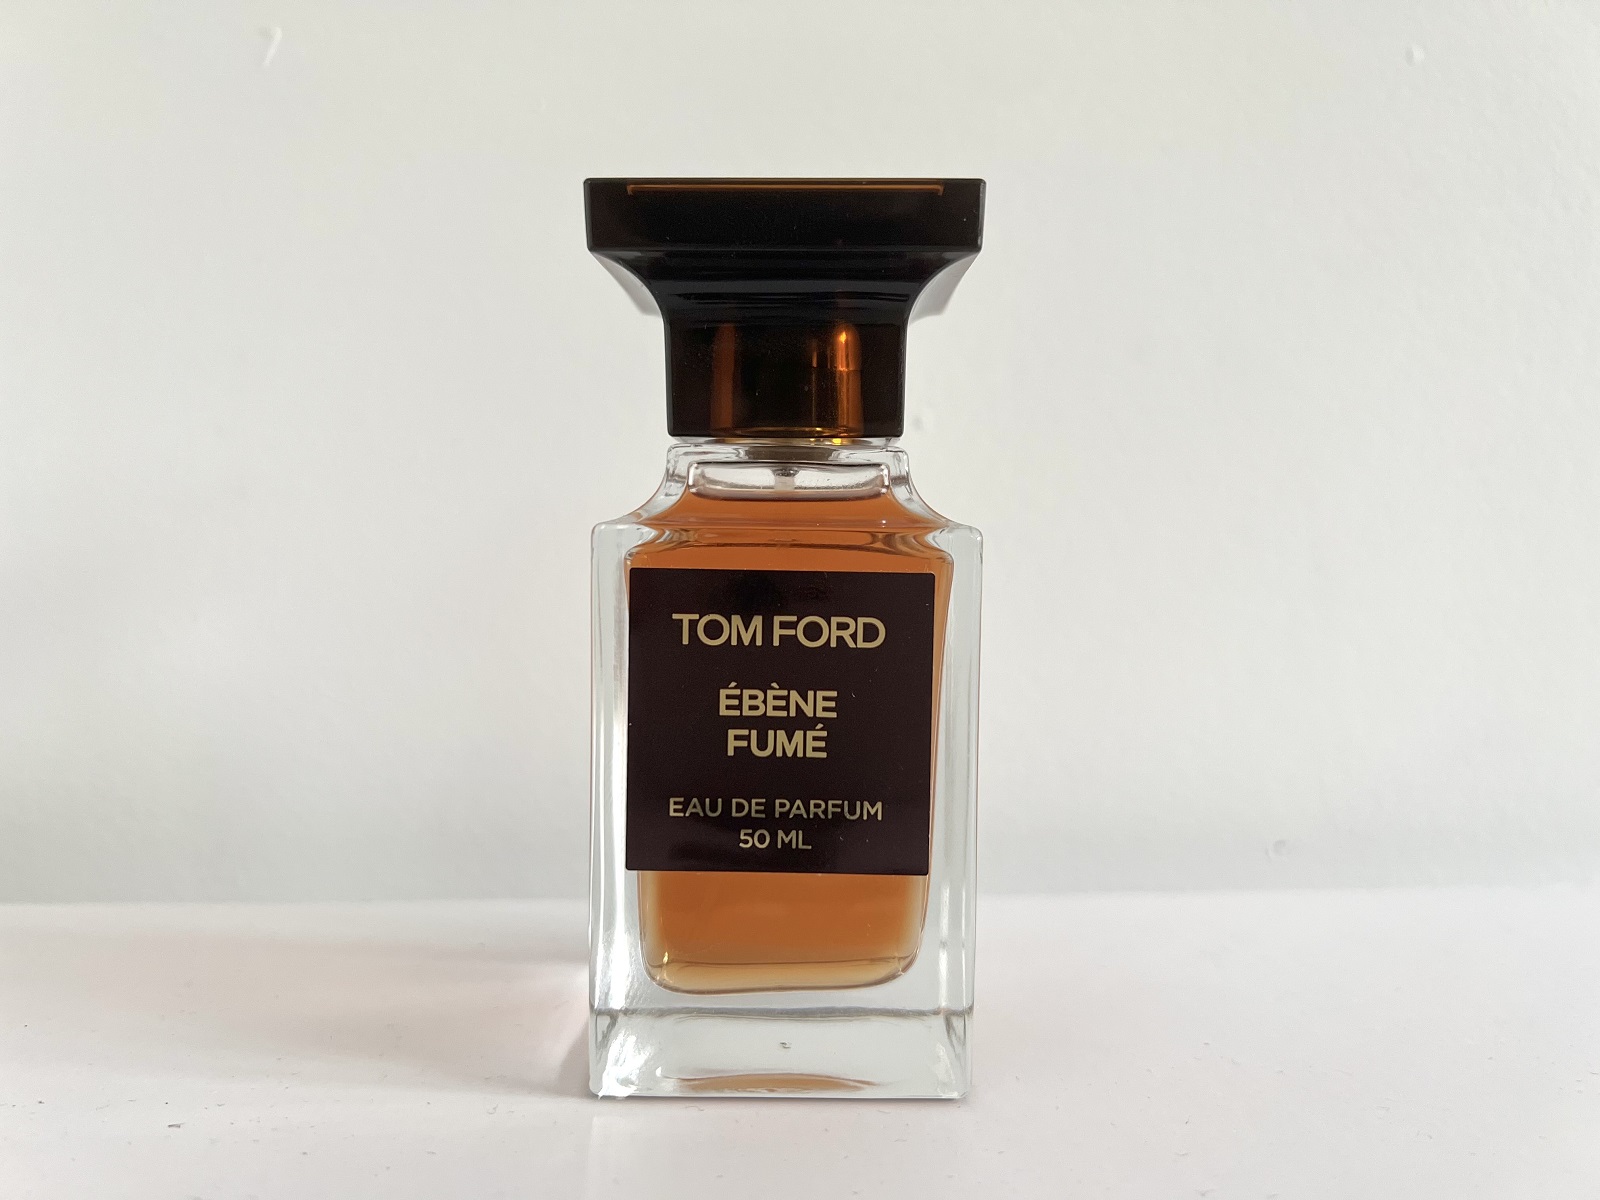 Tom Ford Ebene Fume Is An Essential Layer Of Spice & Smoke